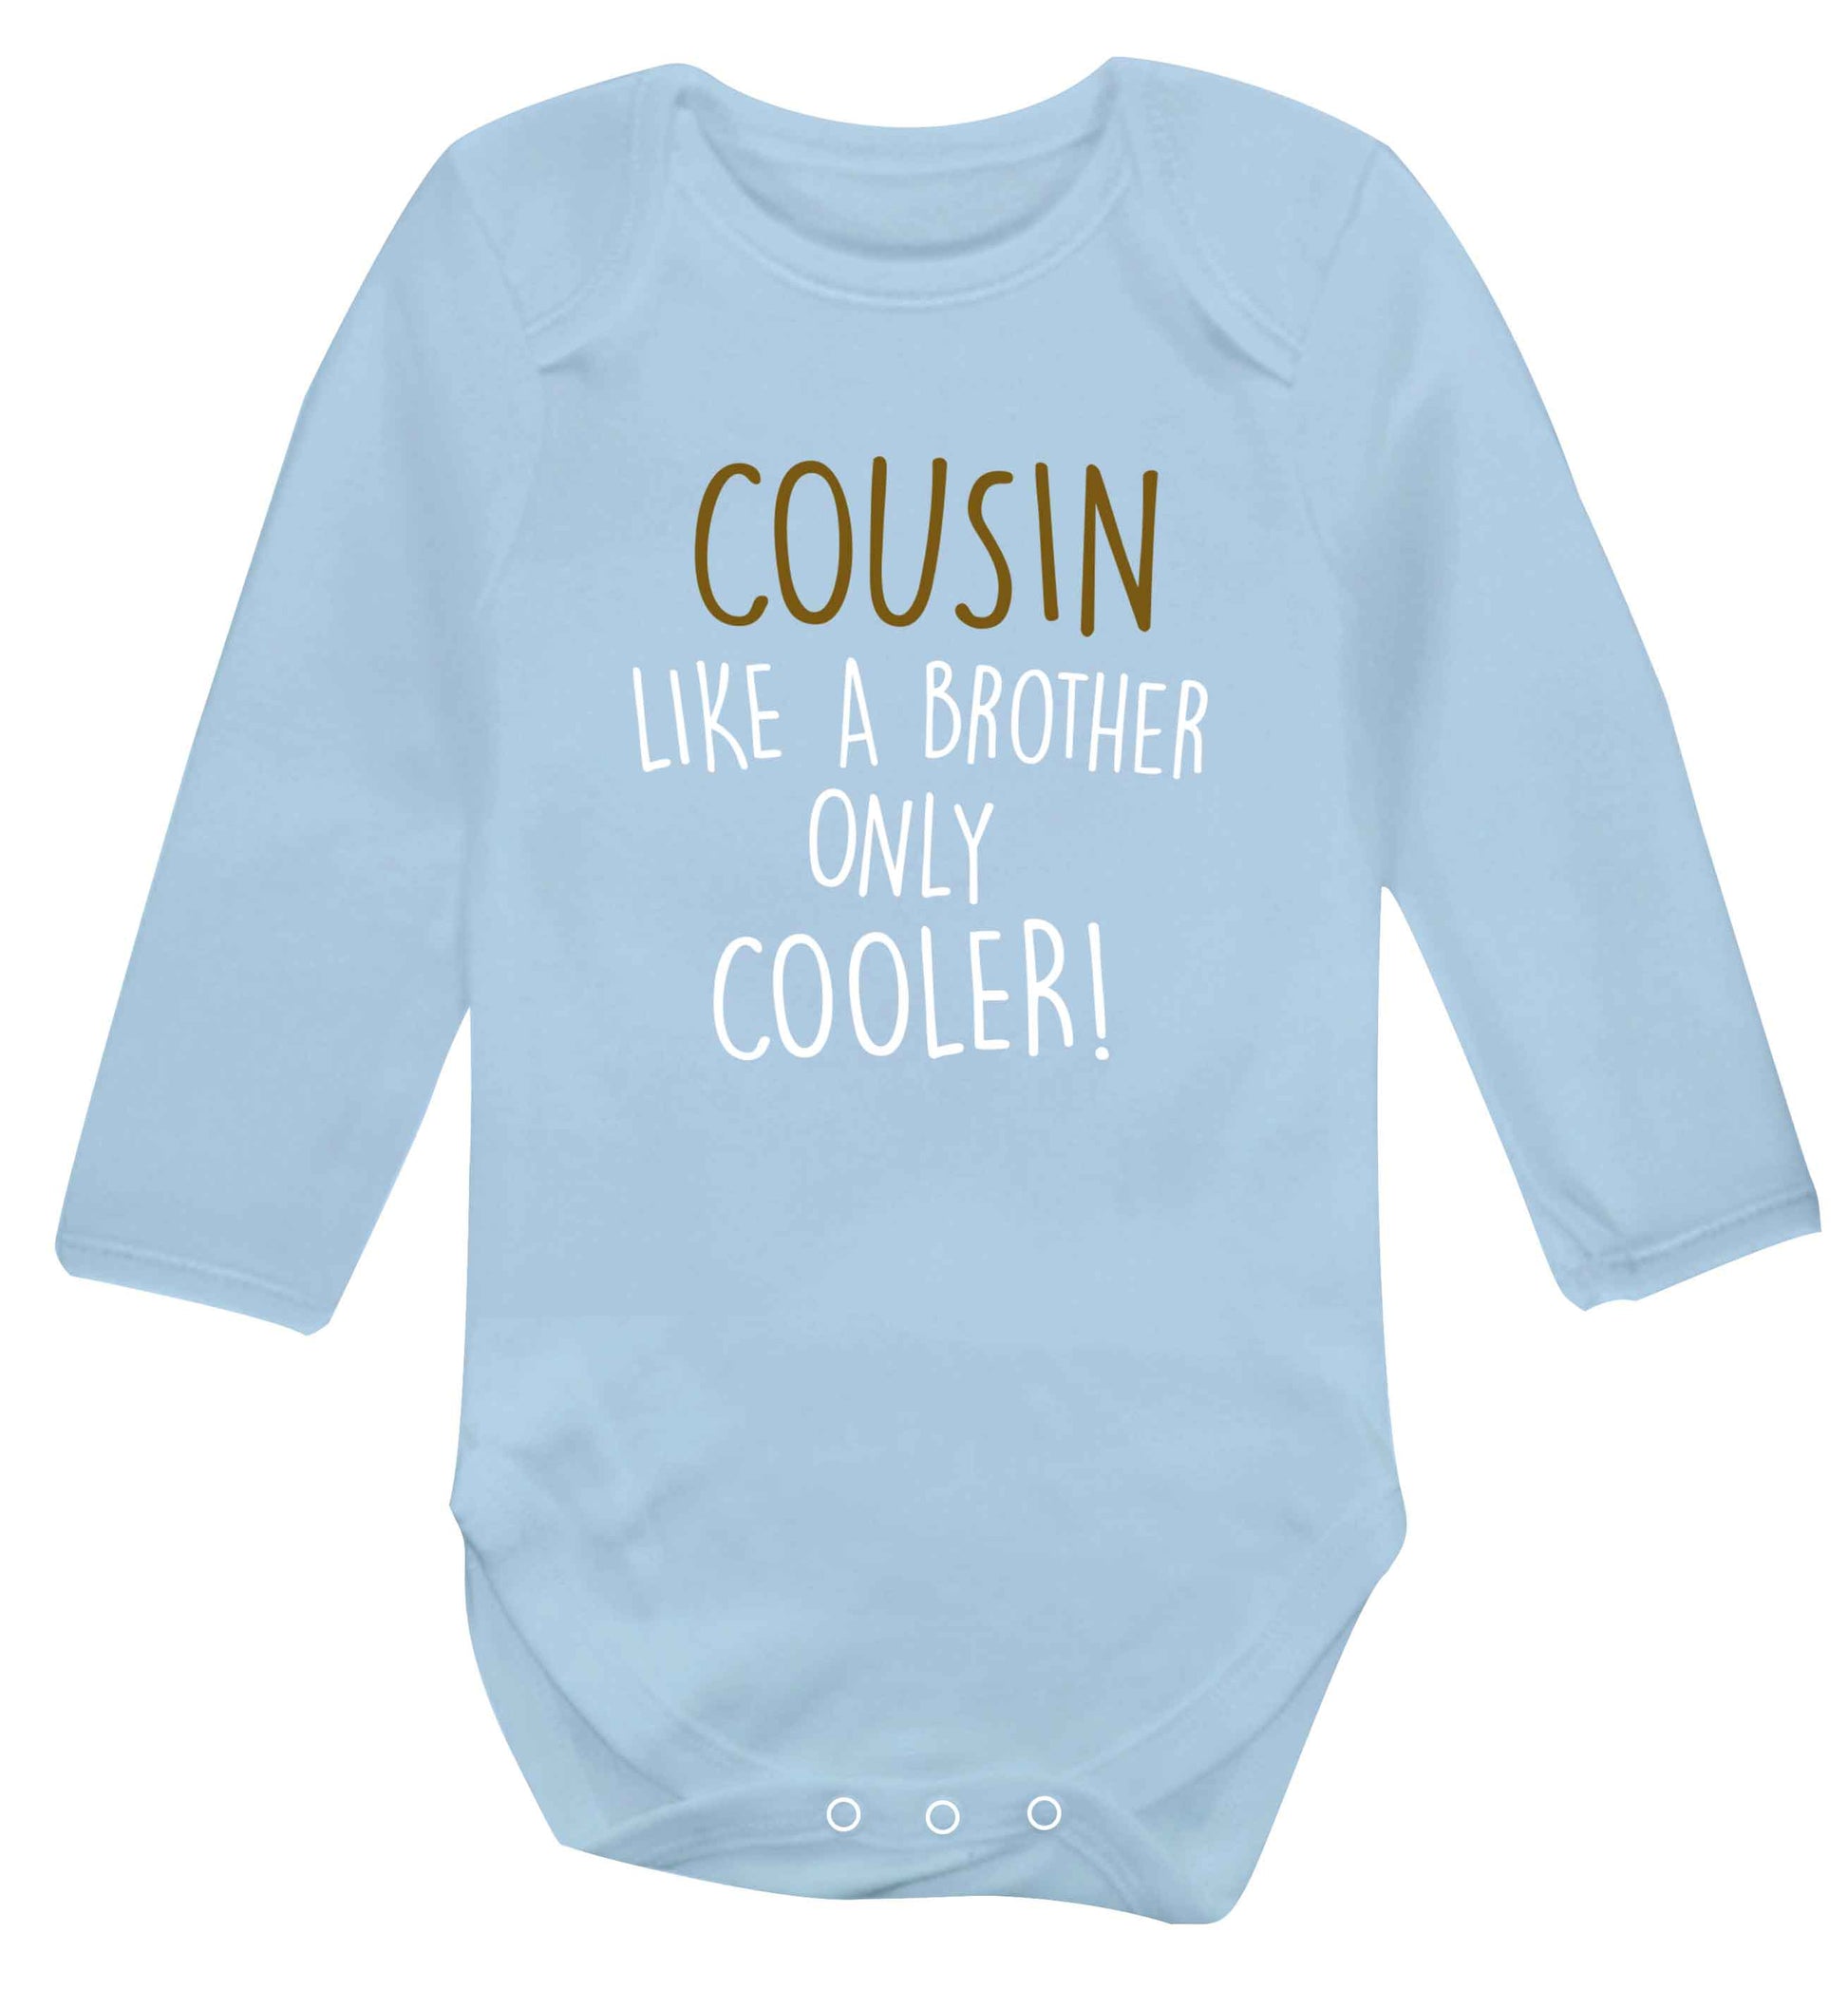 Cousin like a brother only cooler baby vest long sleeved pale blue 6-12 months